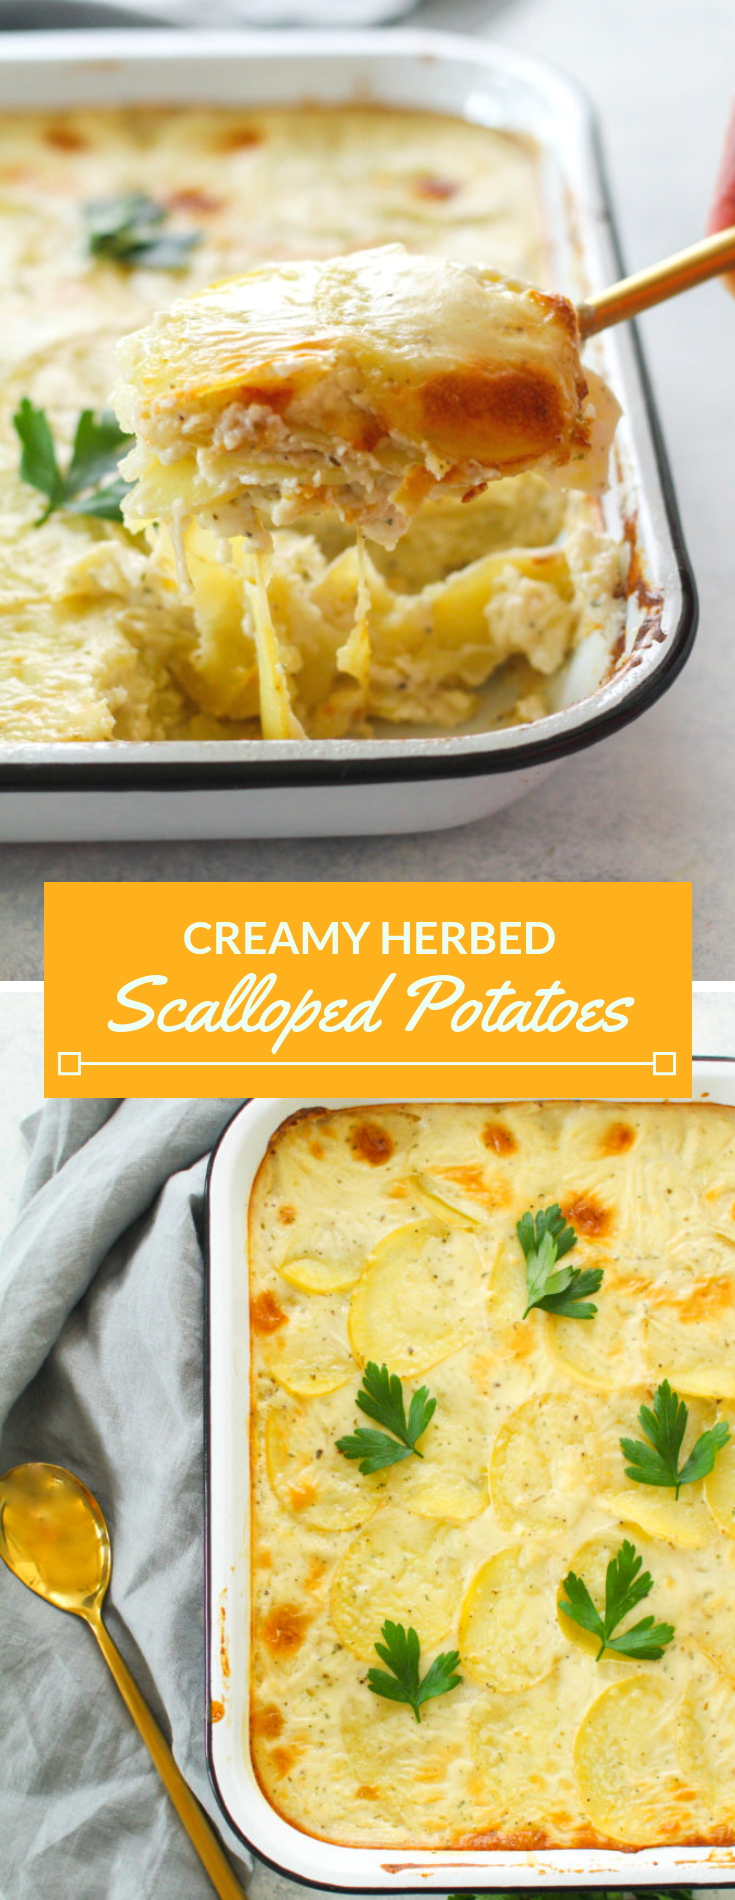 Layers of thinly sliced Yukon gold potatoes covered in a creamy herbed sauce and baked until soft and golden brown. These scalloped potatoes are the perfect comforting side dish to any meal this Fall or Winter season. 